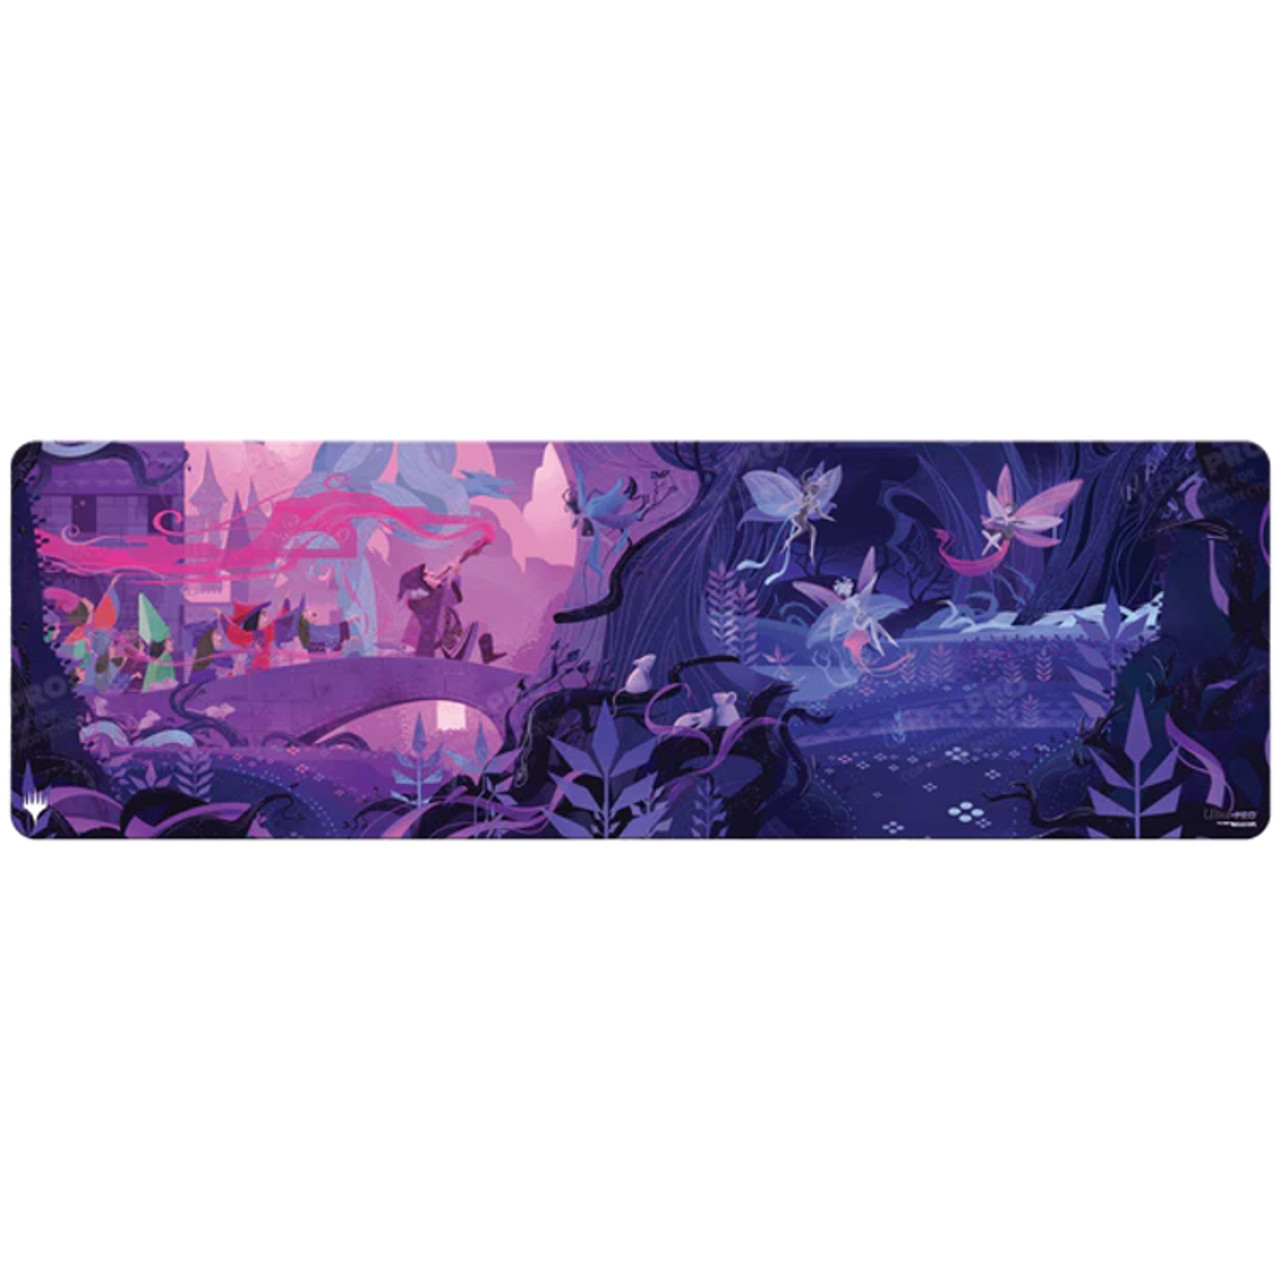 CLOSEOUT - ULTRA PRO LLANOWAR VISIONARY PLAYMAT 12-COUNT CASE